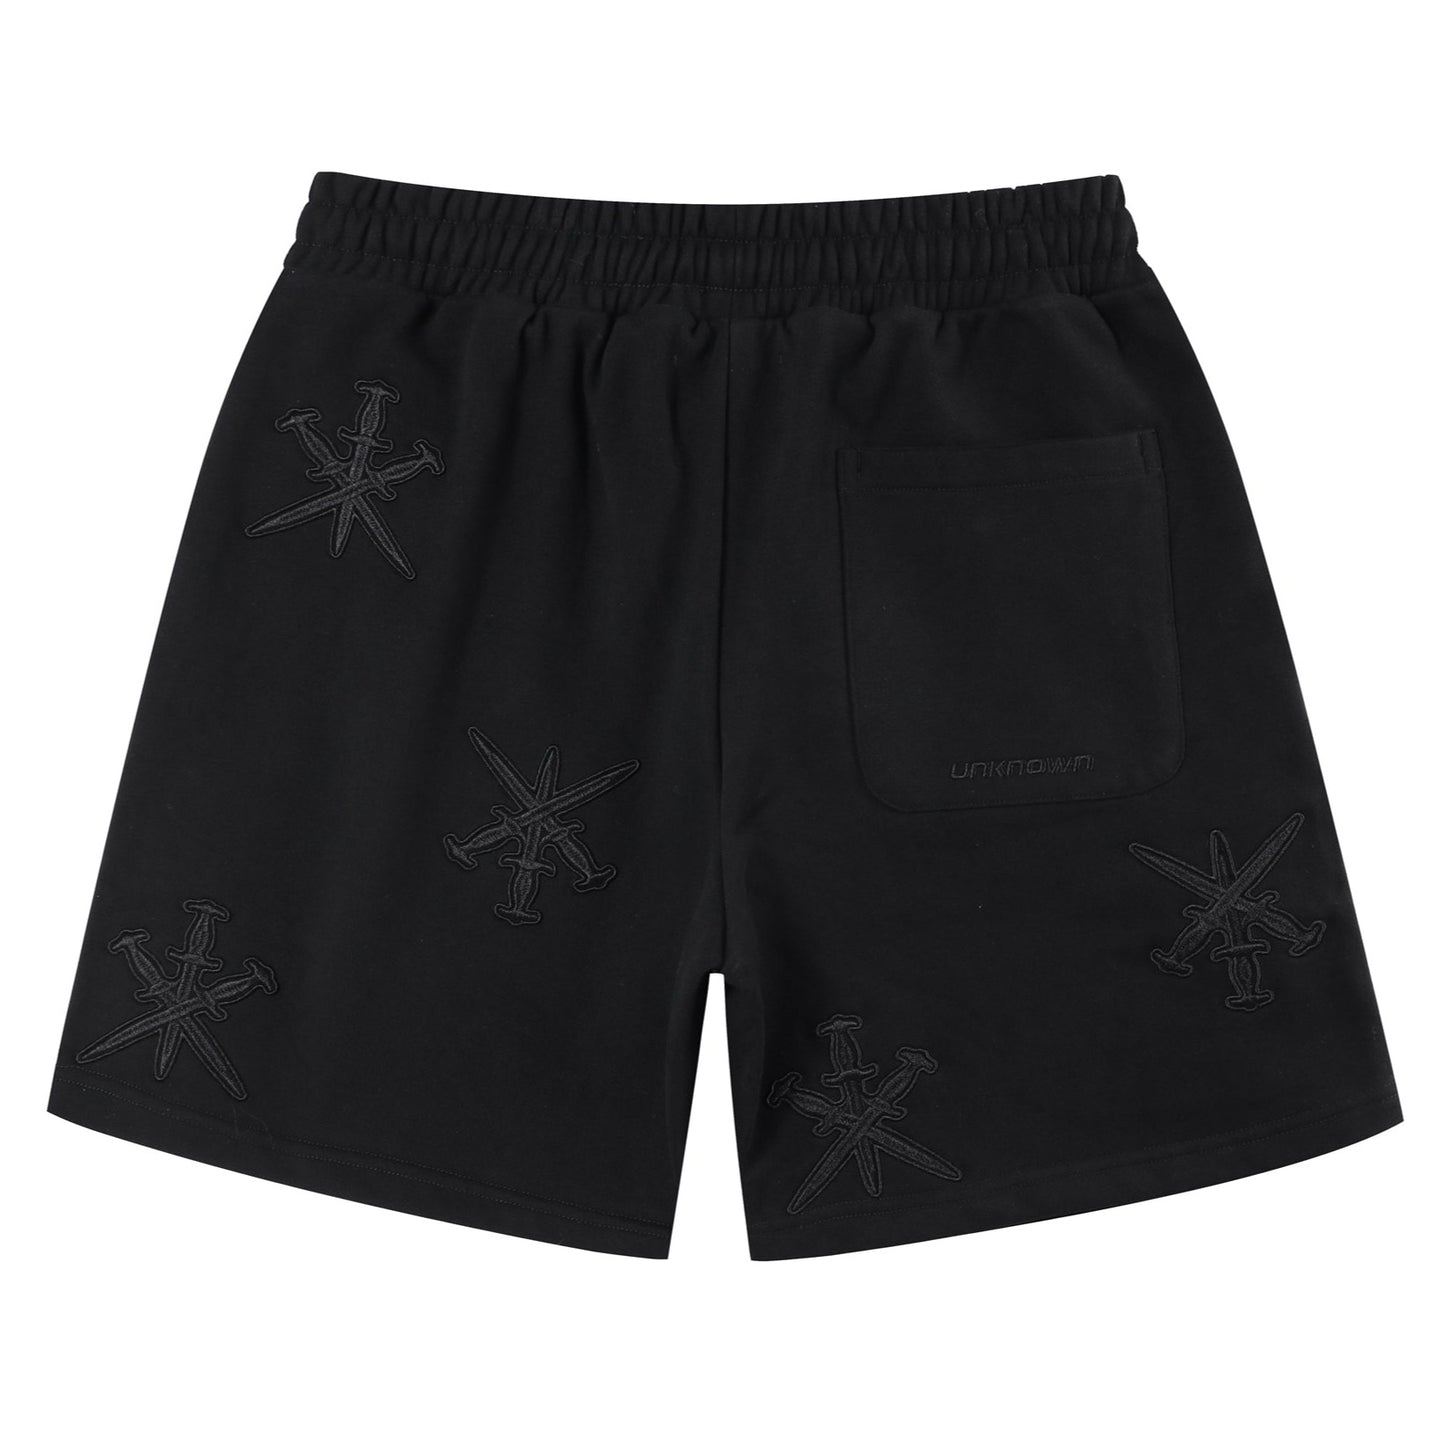 EMBROIDERED DAGGER SHORTS